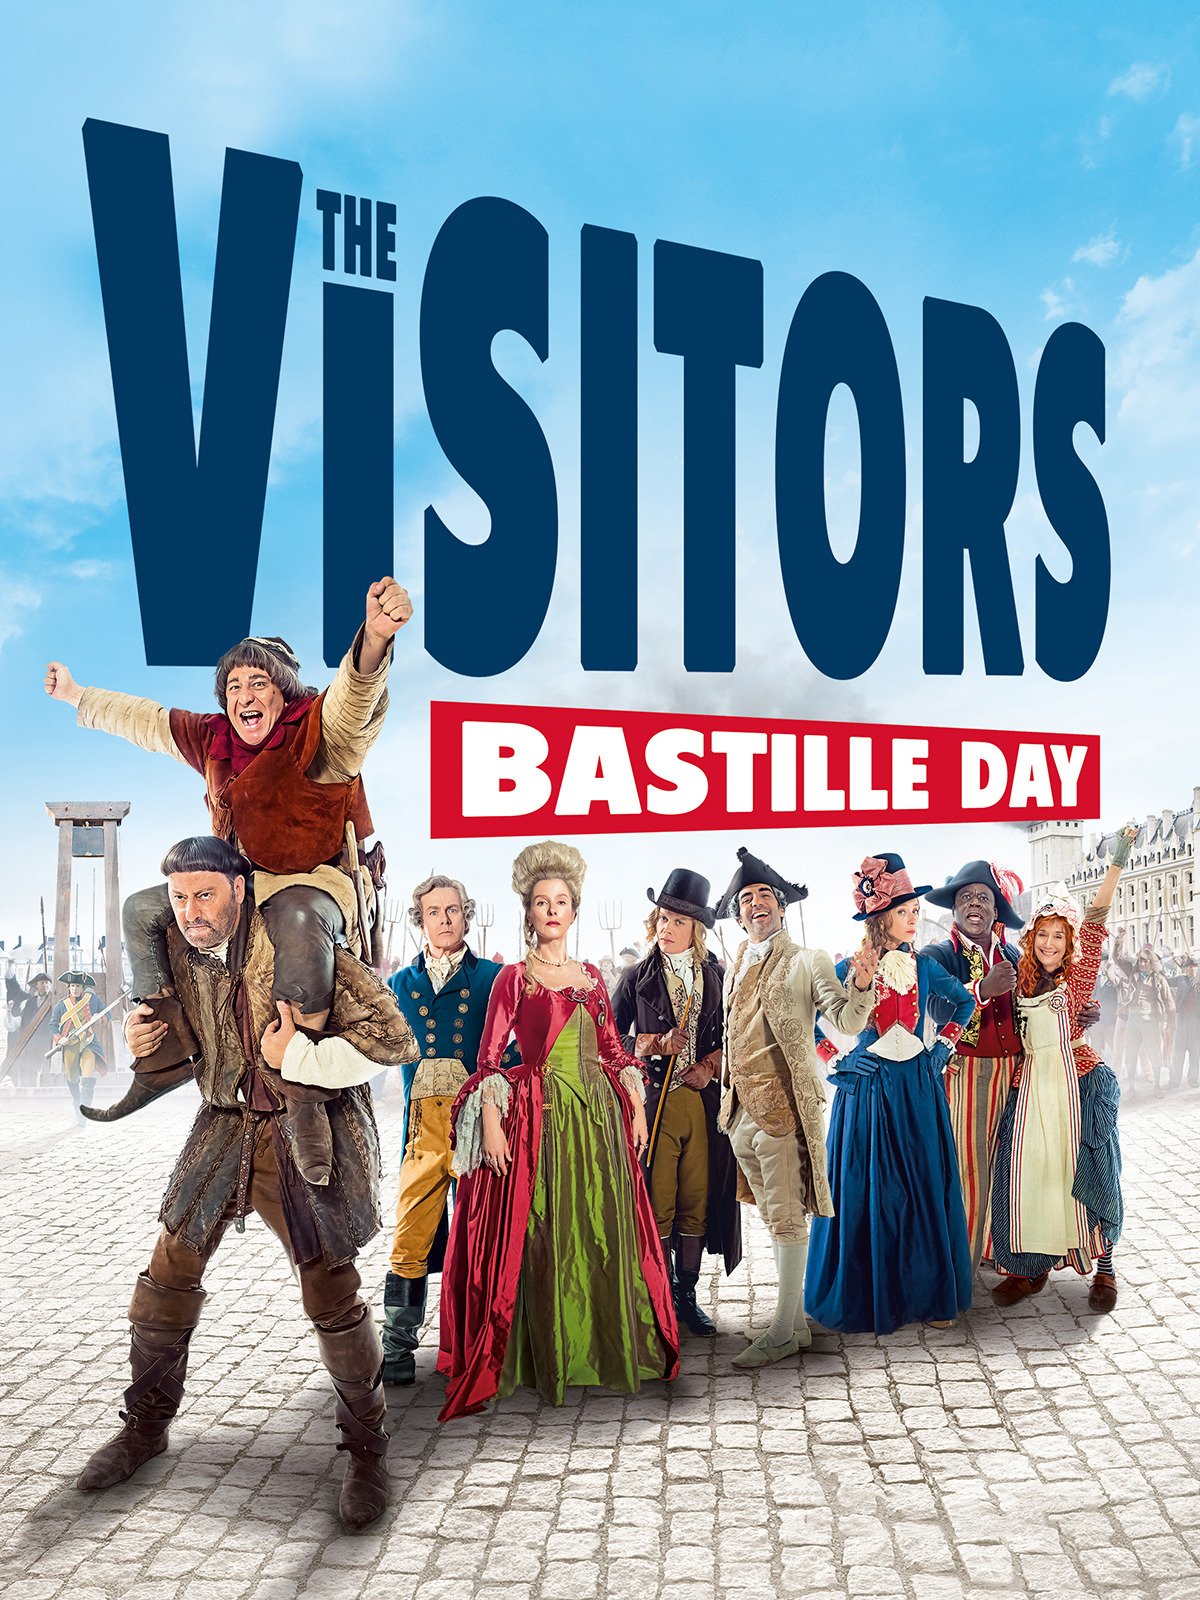 The Visitors: Bastille Day Main Poster